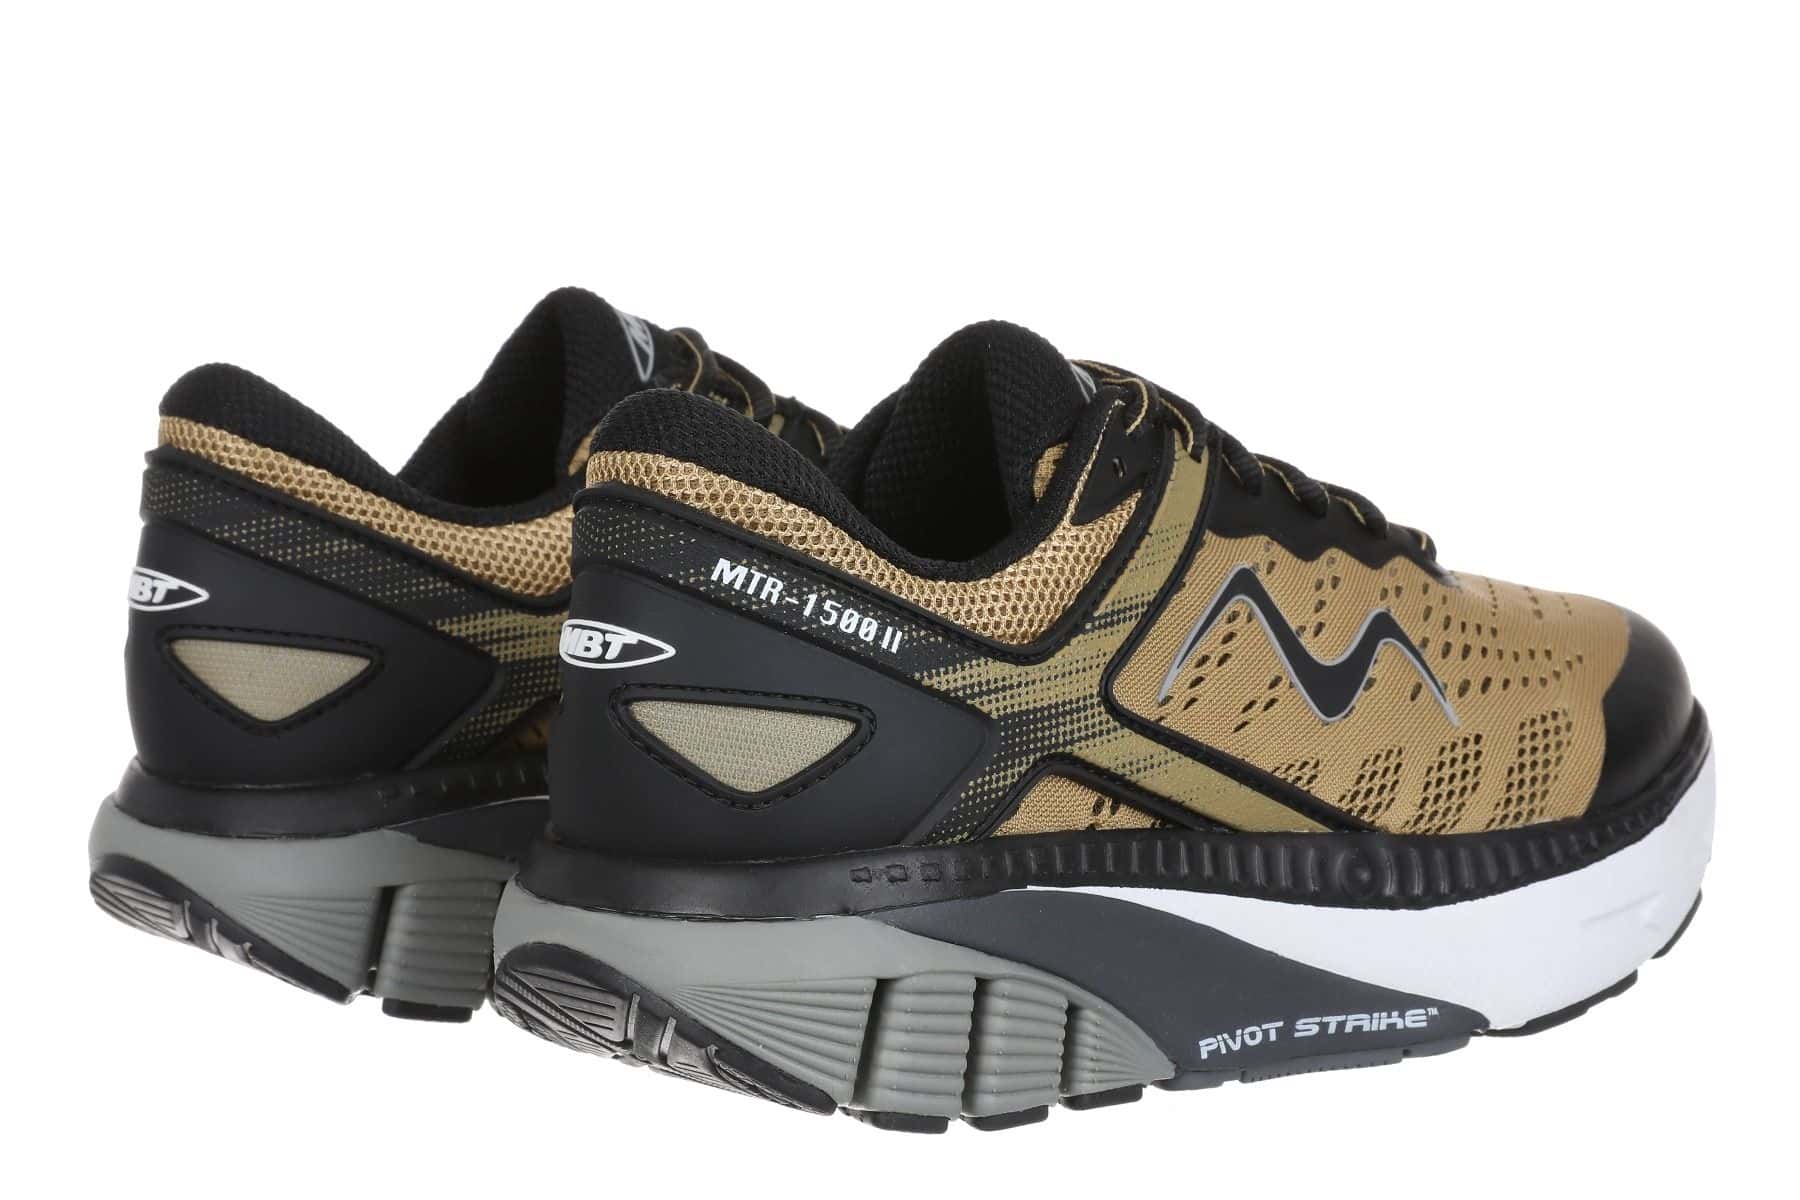 MBT MTR-1500 II LACE UP MEN´S RUNNING SHOES PRAIRIE SAND